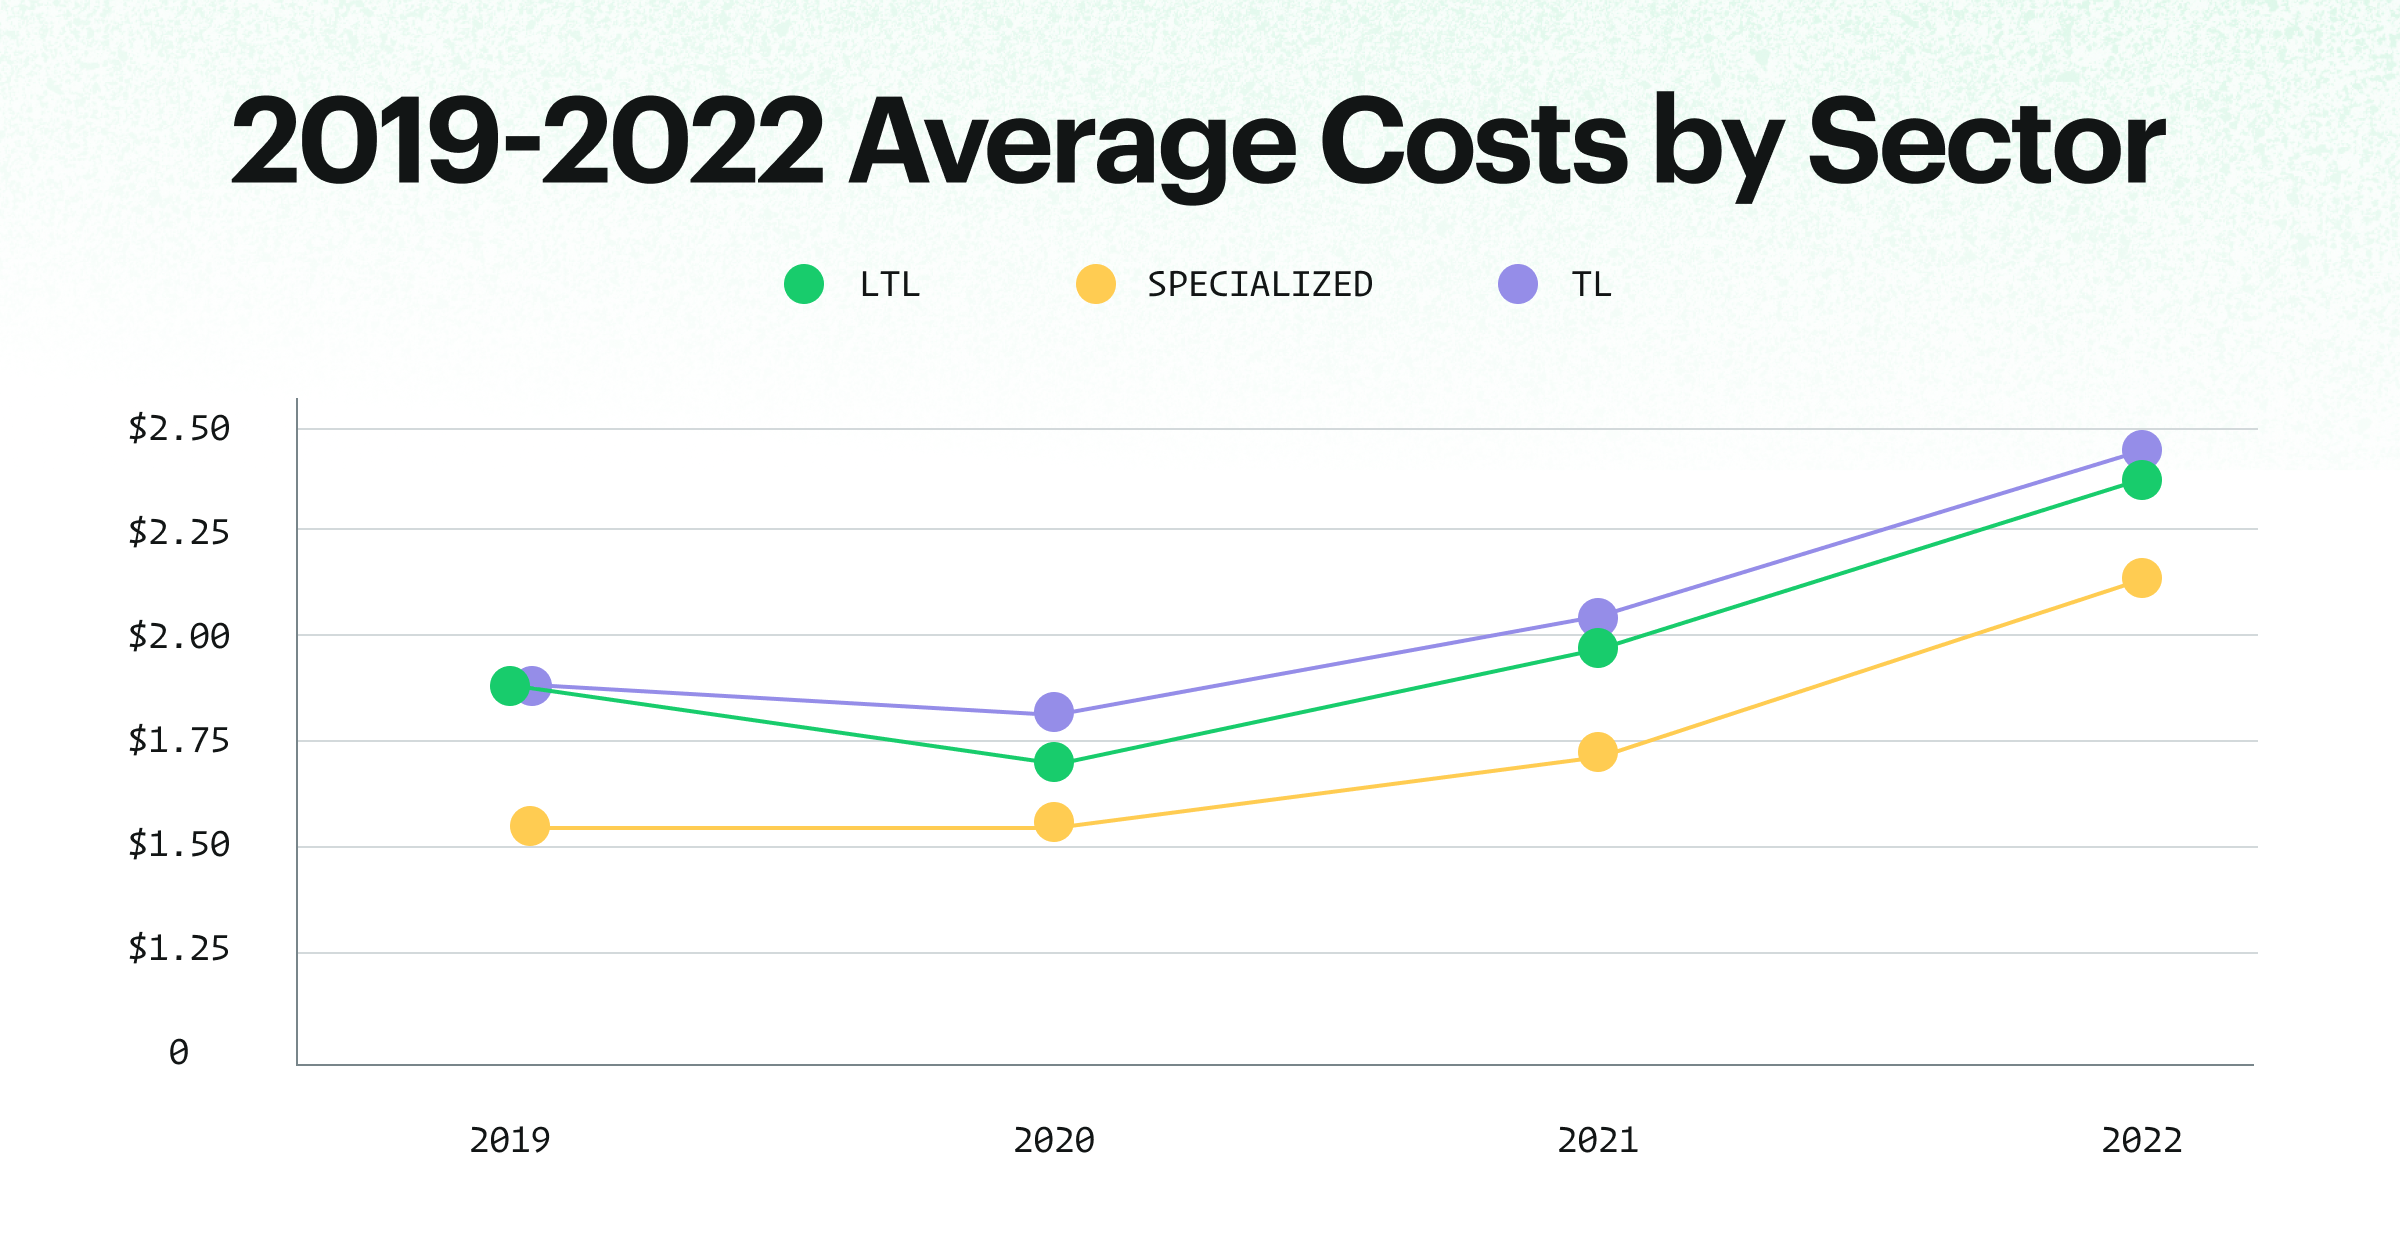 2019-2022 Average Costs by Sector